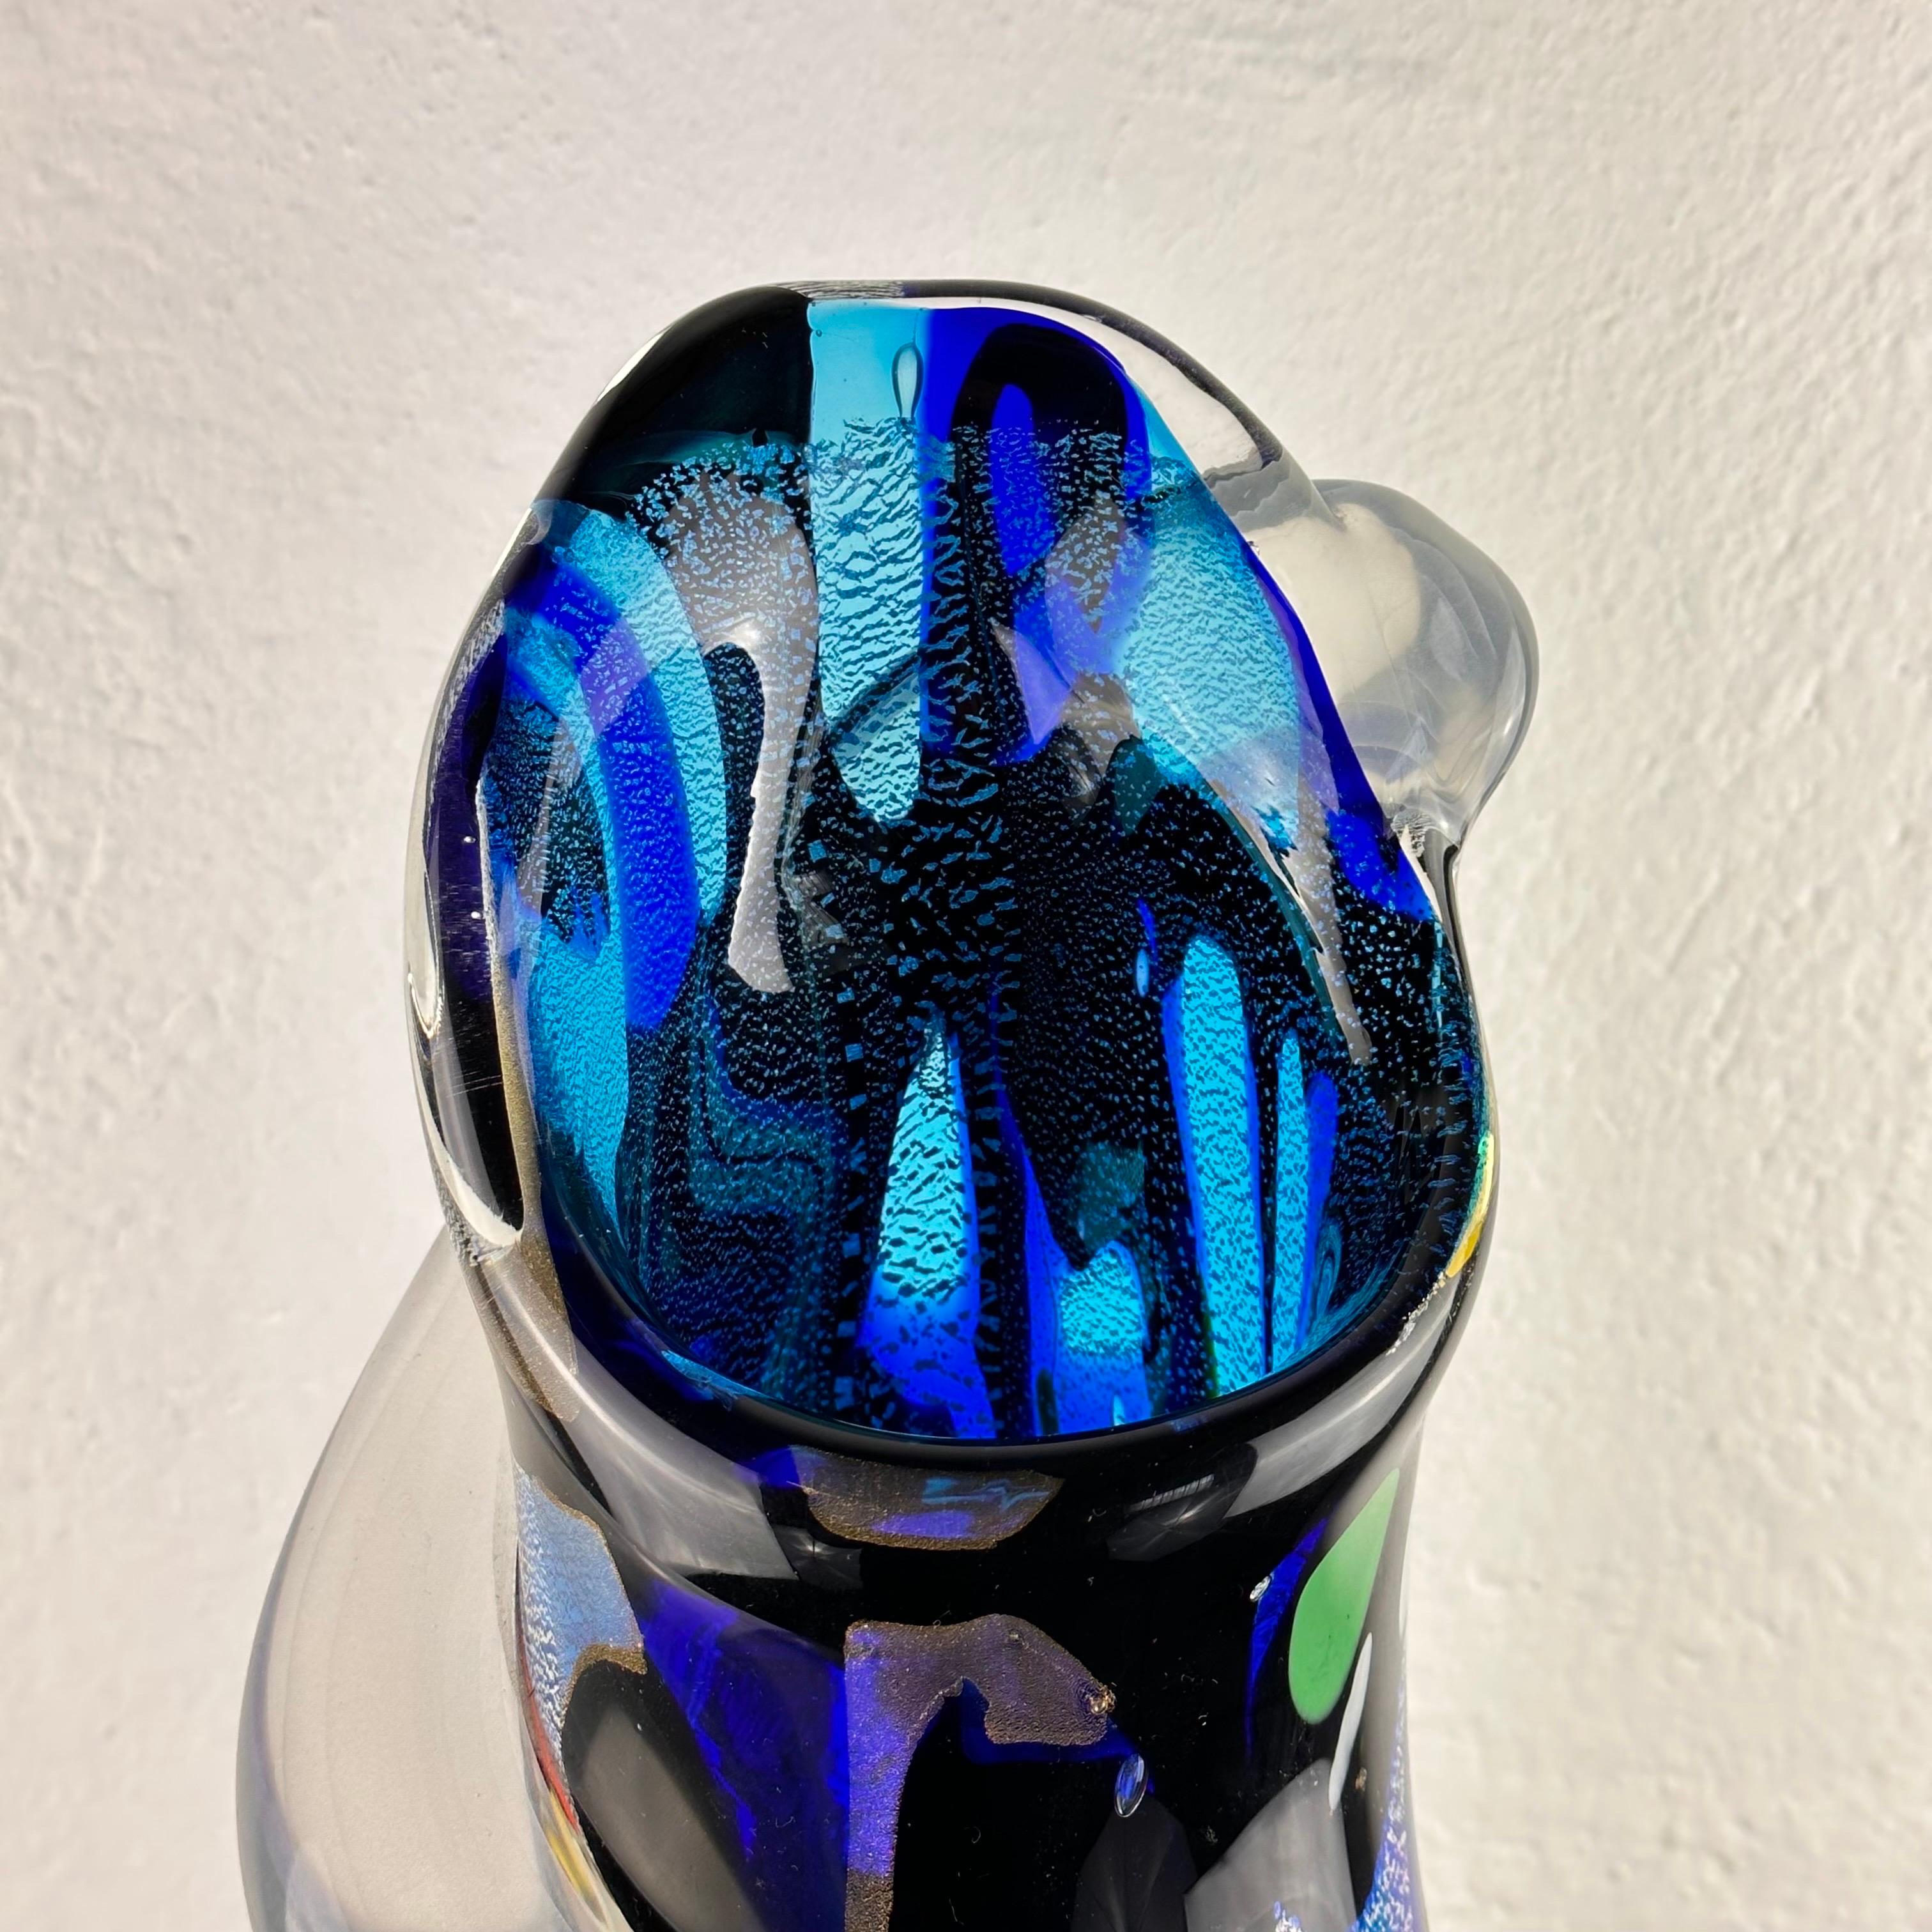 Exquisite Abstract Murano Glass Vase by S. Toso, Signed 1970s Masterpiece For Sale 3